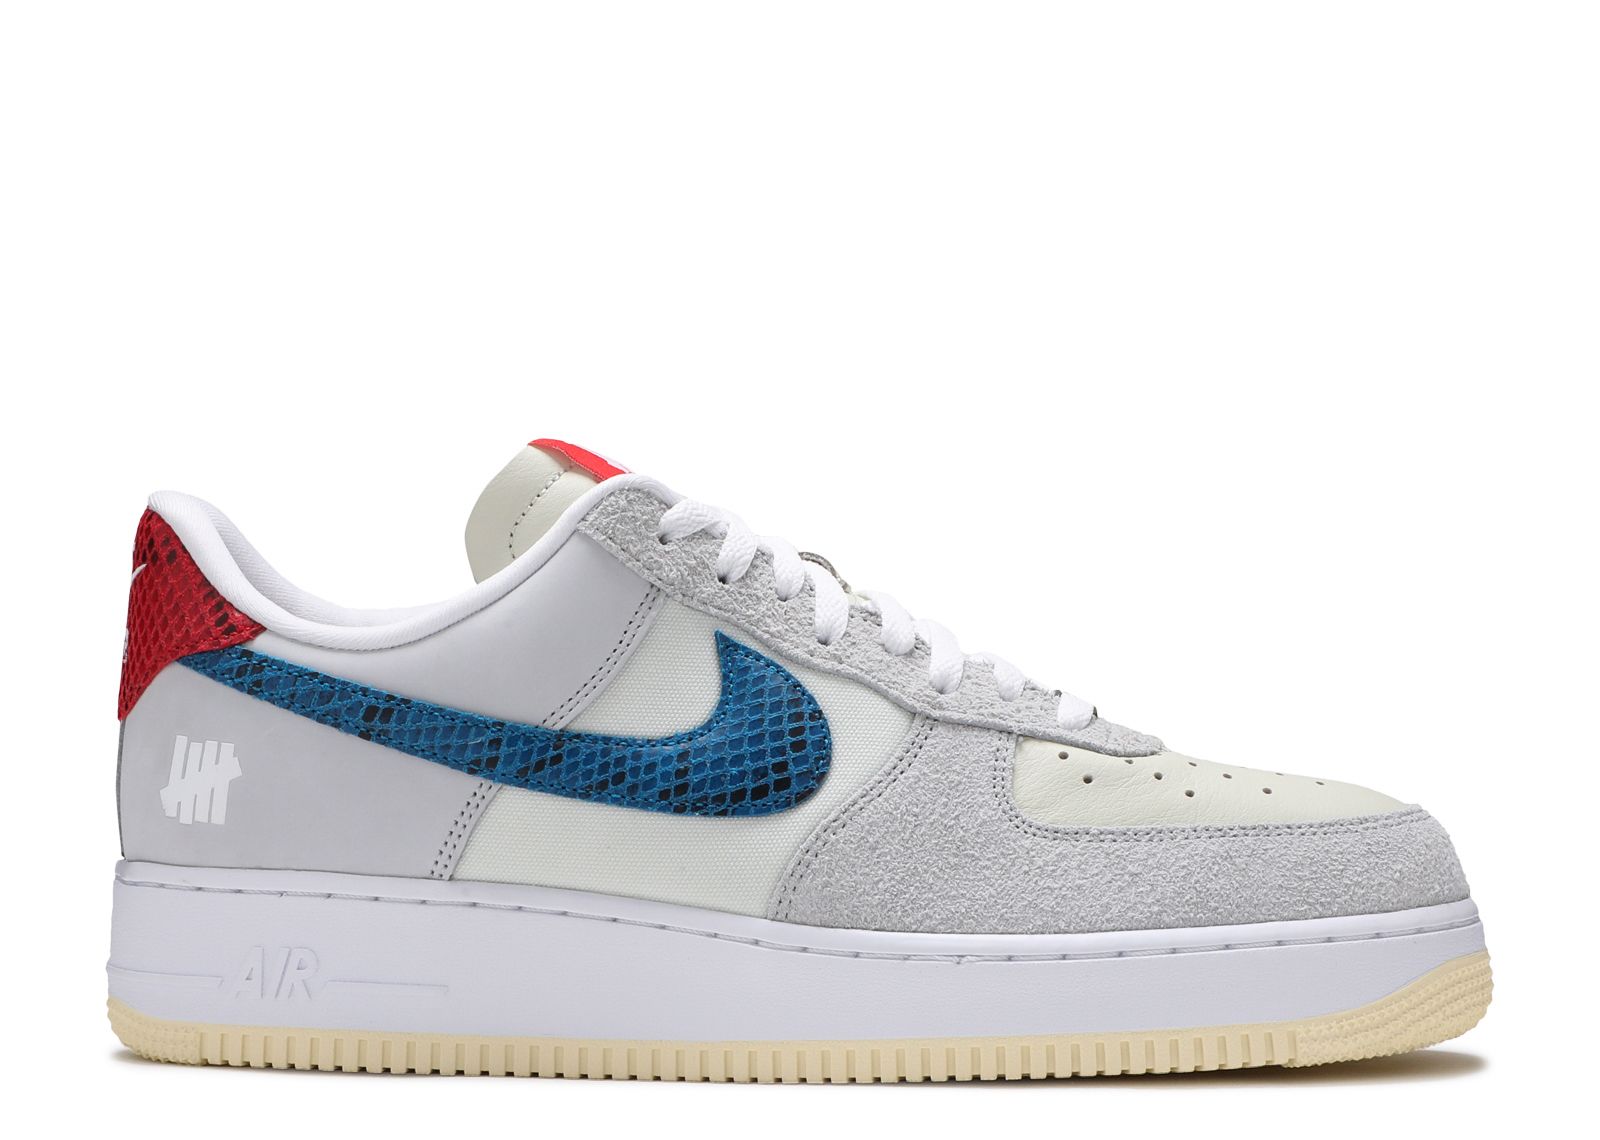 Undefeated X Air Force 1 Low '5 On It' Nike DM8461 001 grey fog